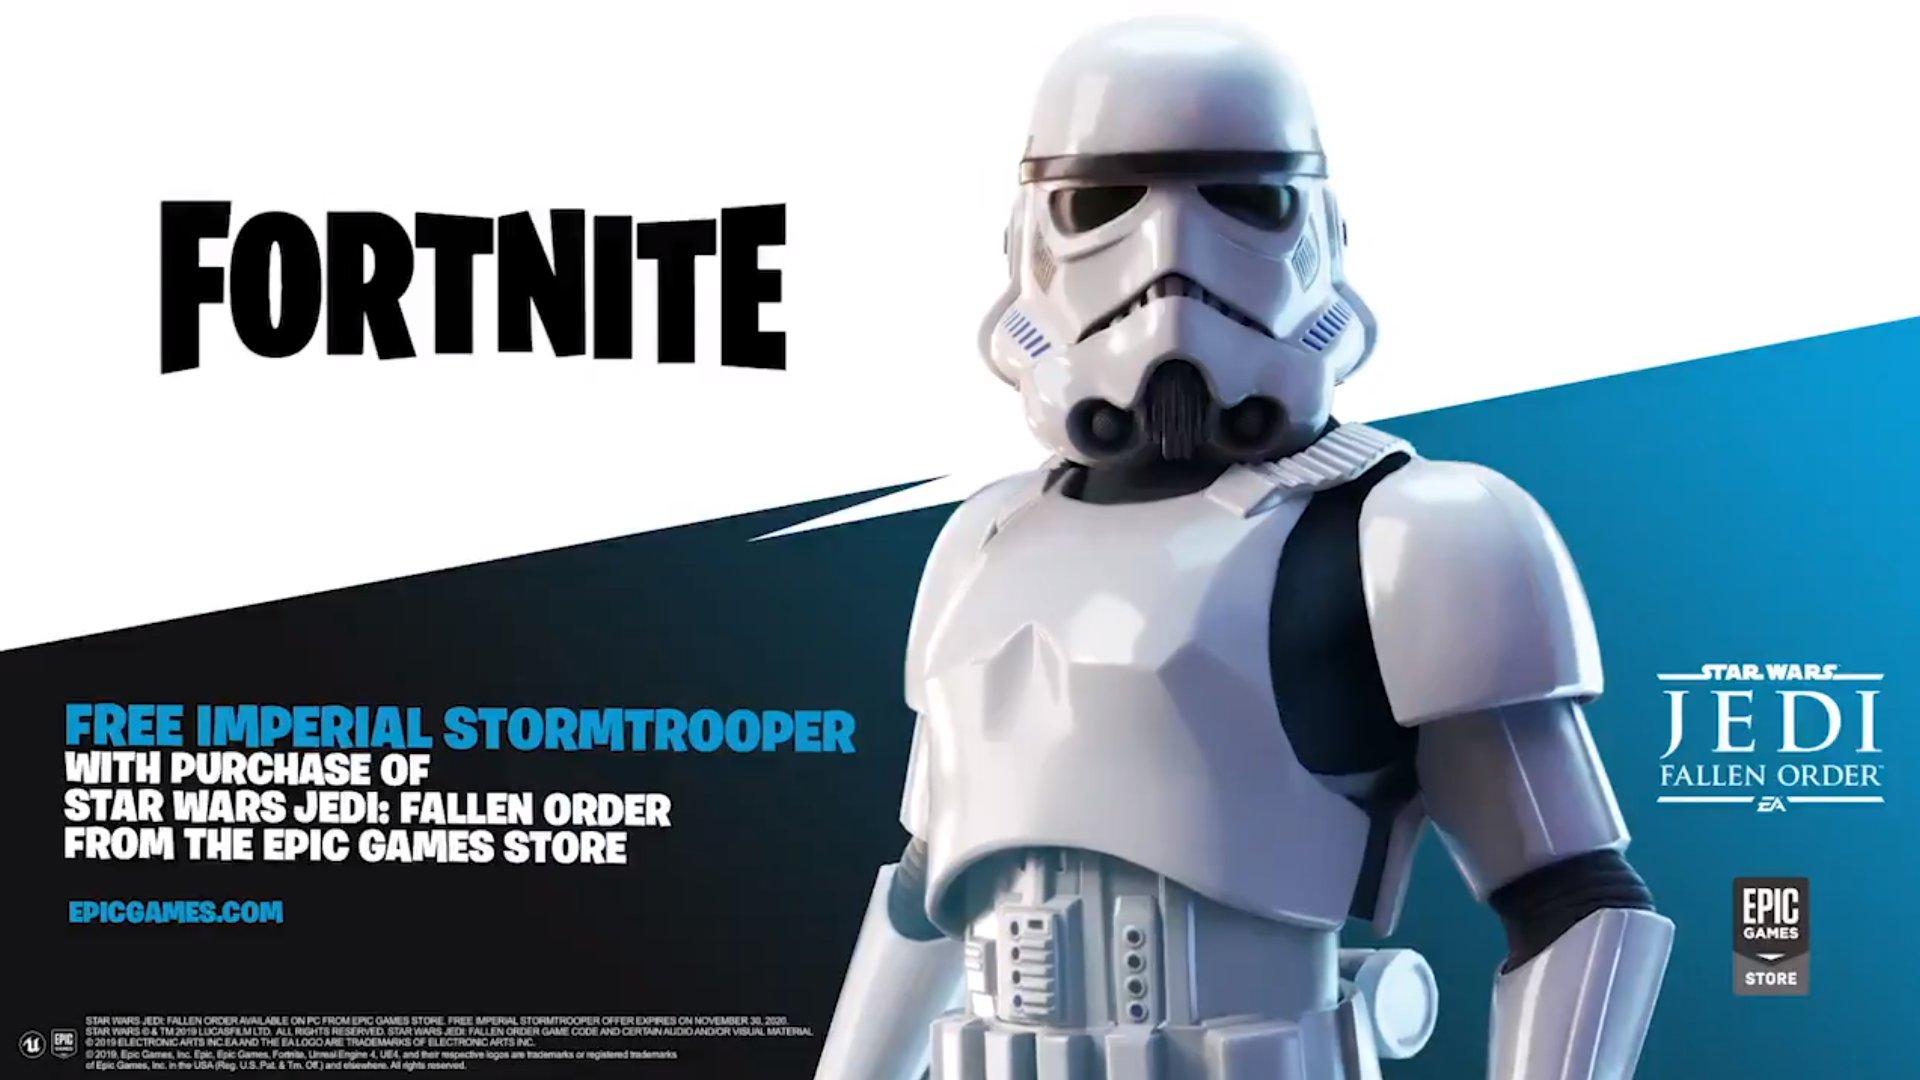 The Stormtrooper skin should be given to bots because they